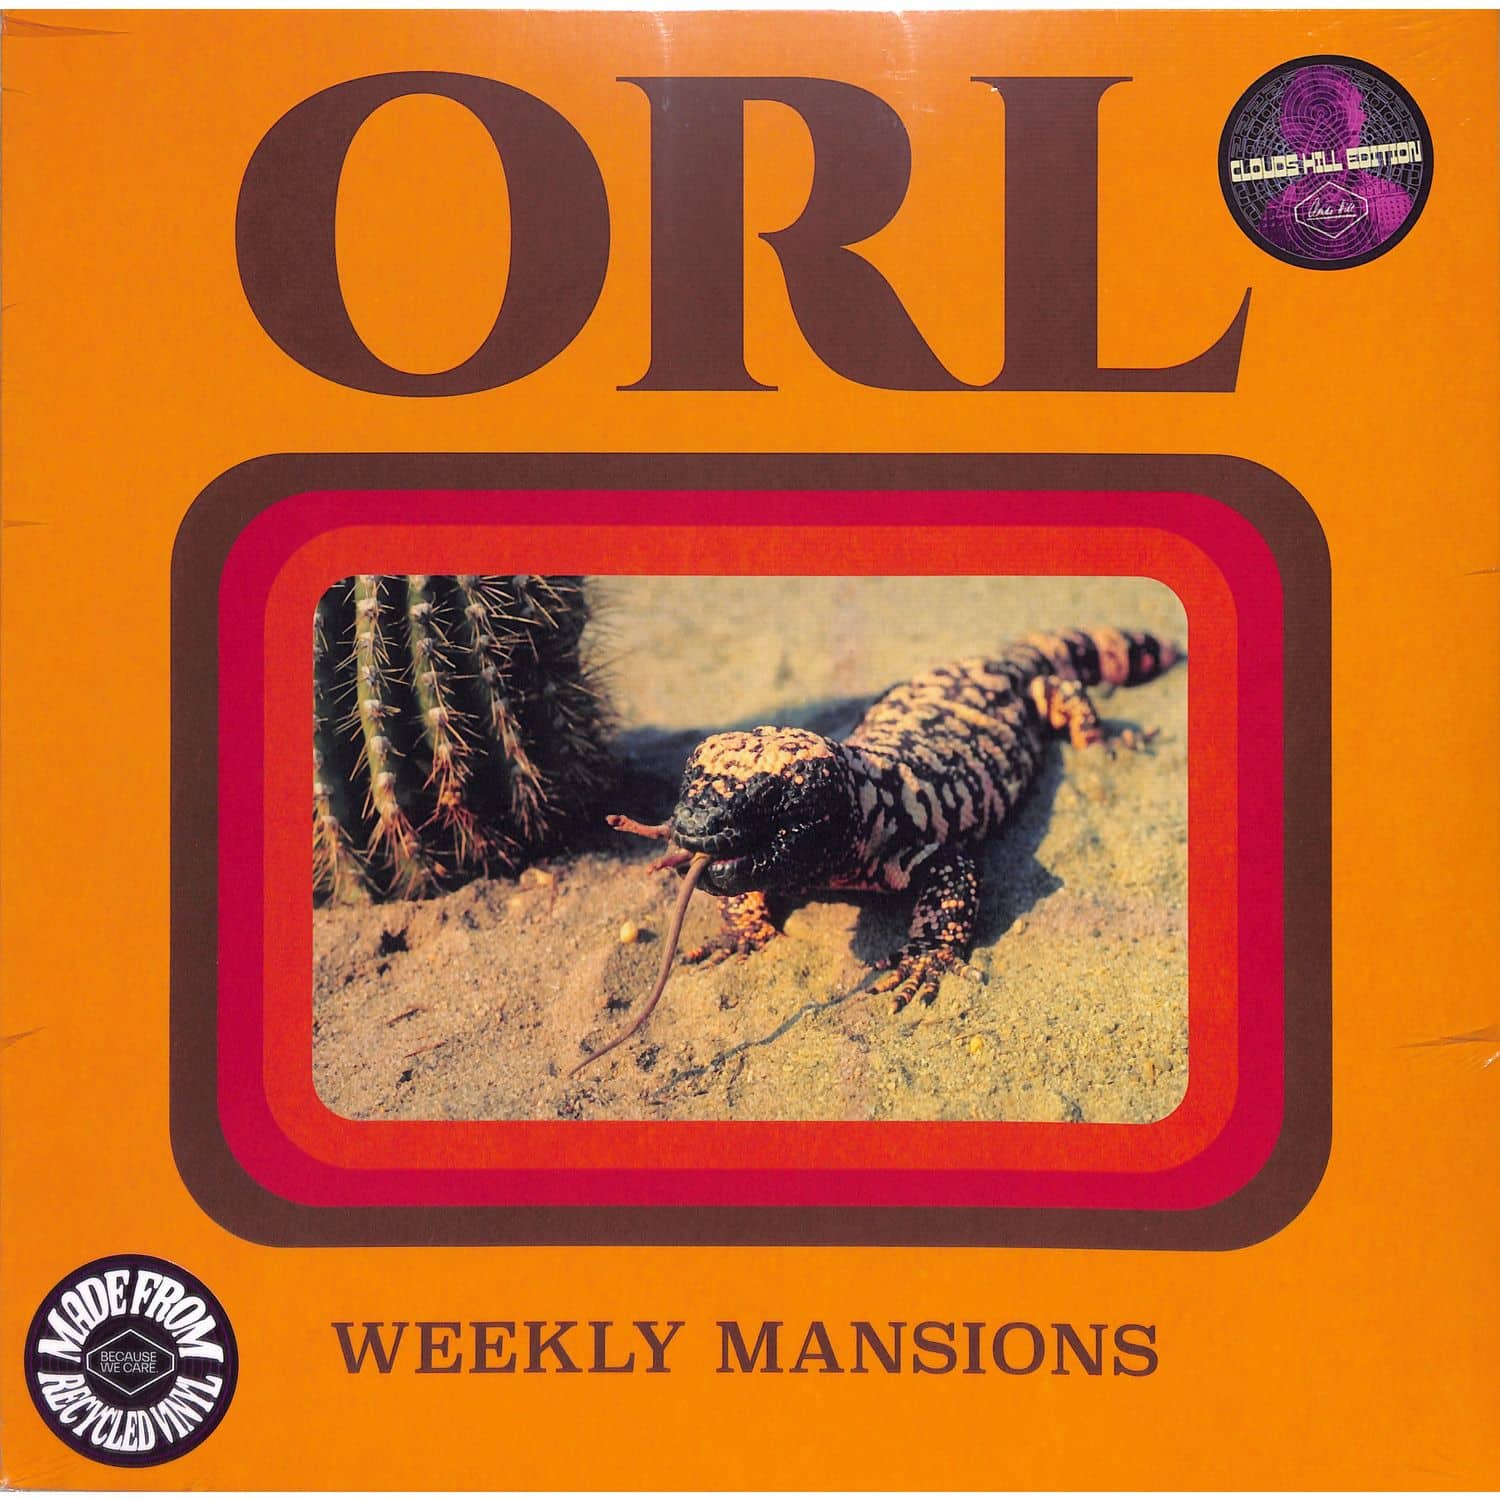 Omar Rodriguez-Lopez - WEEKLY MANSIONS 